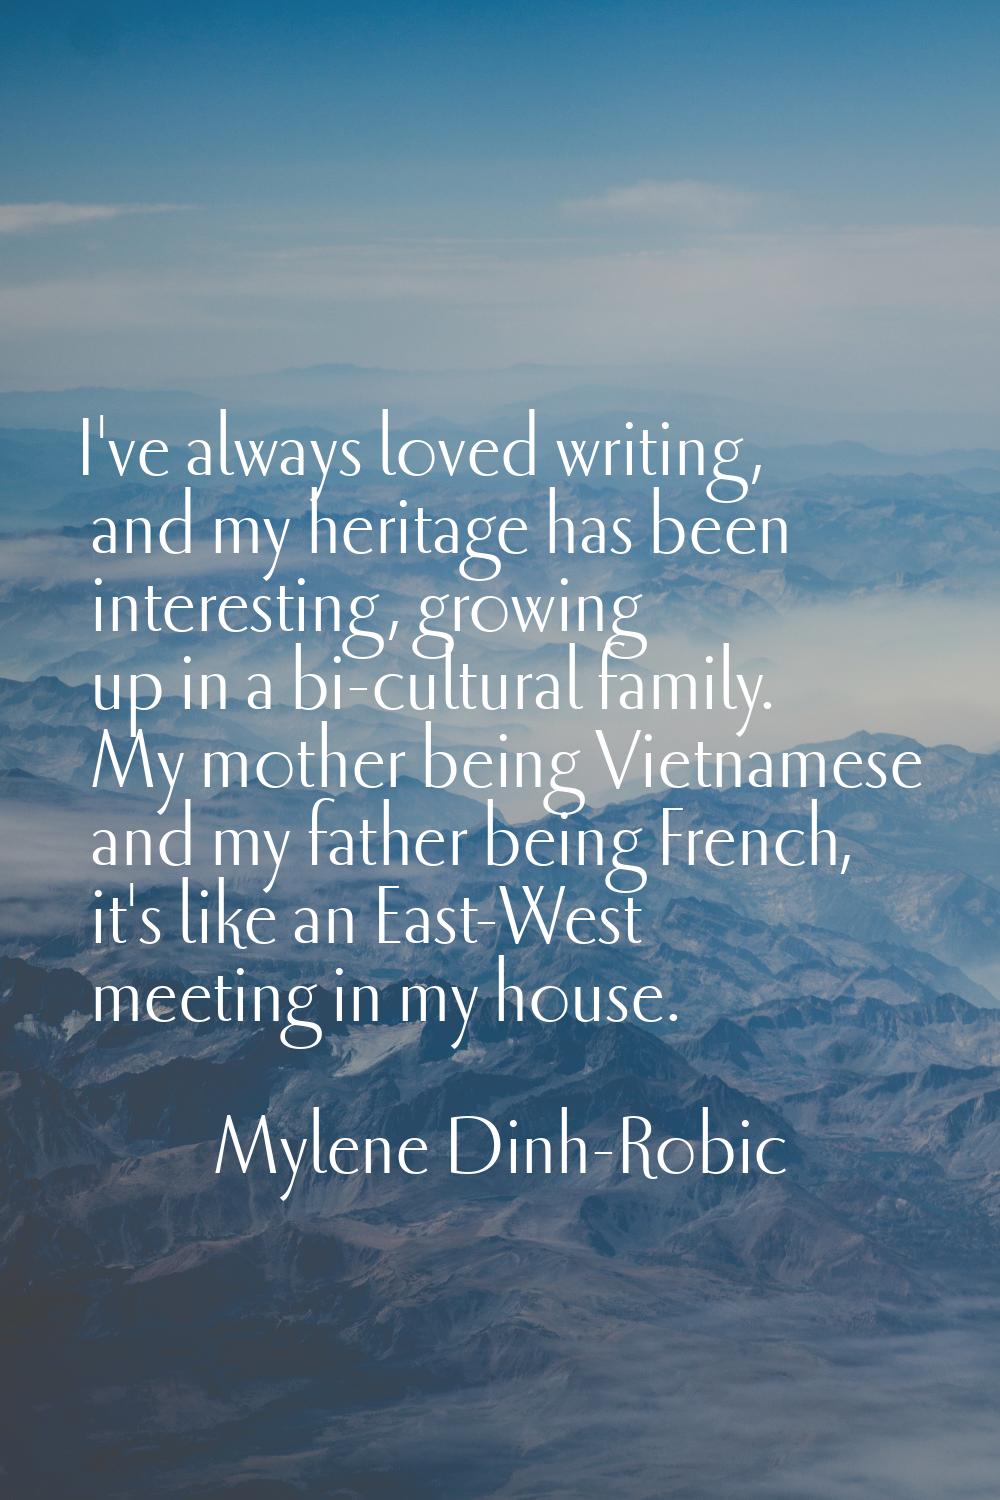 I've always loved writing, and my heritage has been interesting, growing up in a bi-cultural family